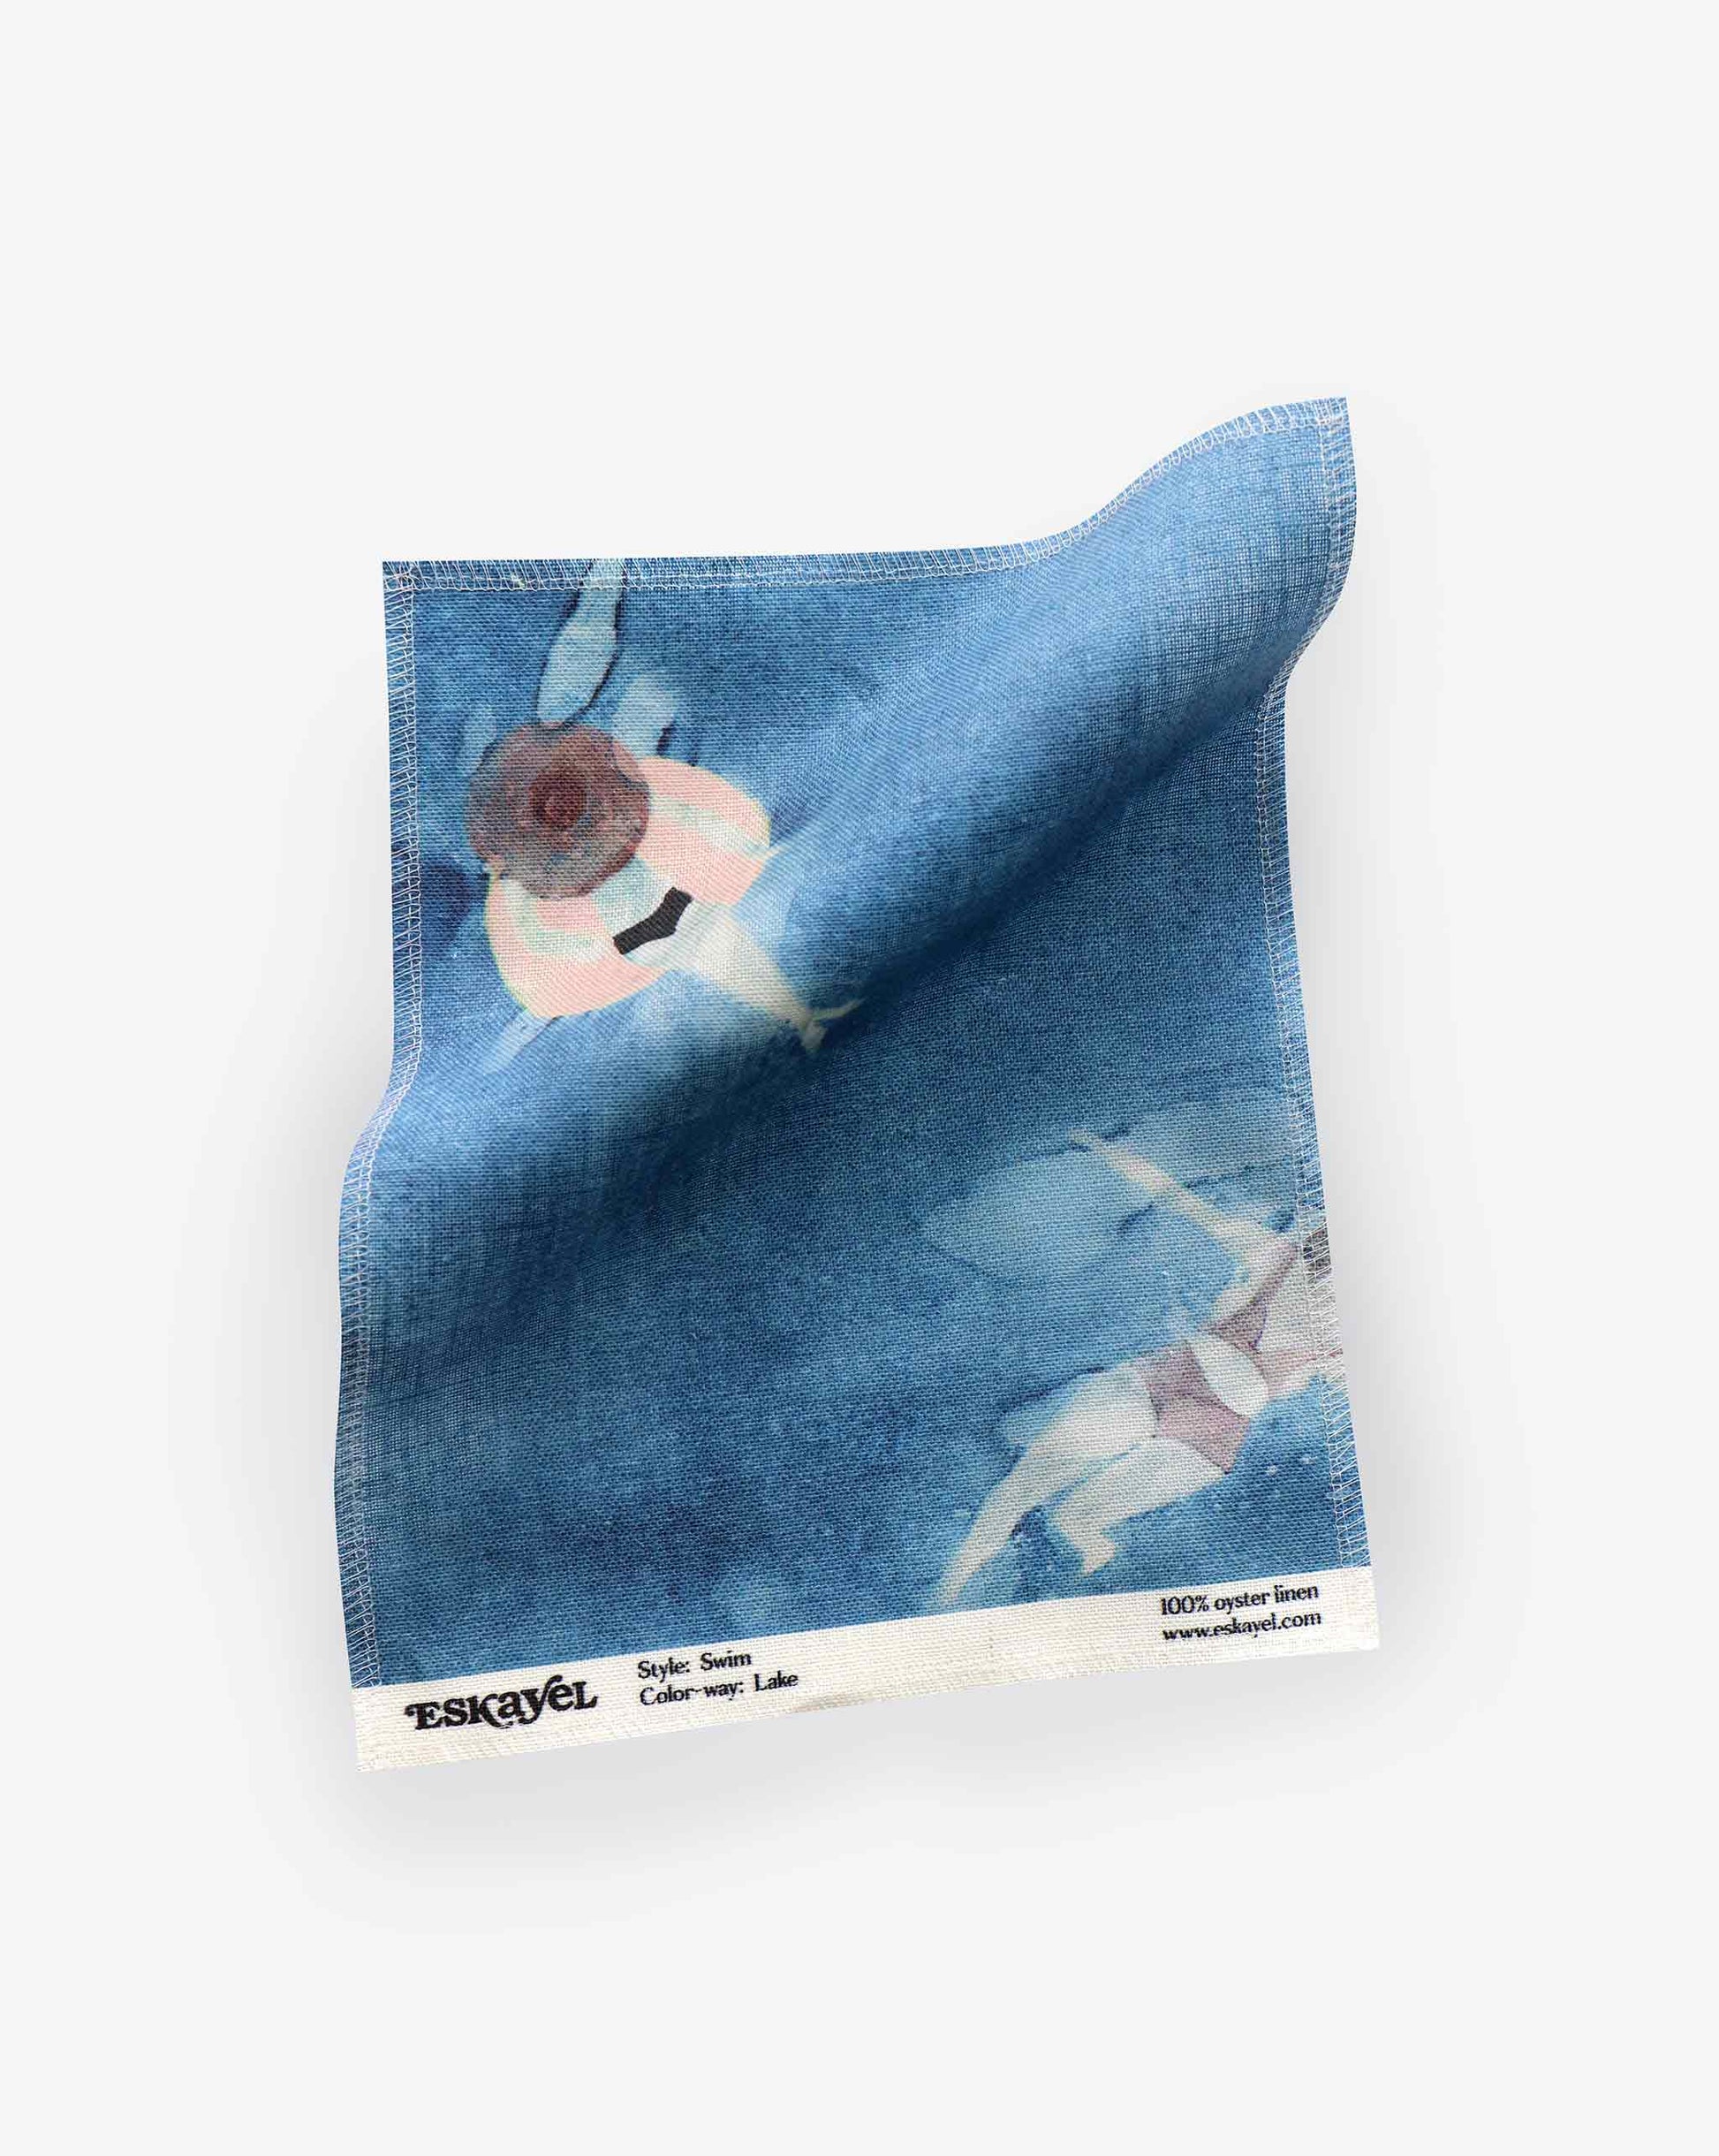 A square Swim Fabric Sample||Lake swatch with a floral design in blue tones, displaying product details such as style and fabric composition along the edge, includes an "Order Sample" option for customer convenience.